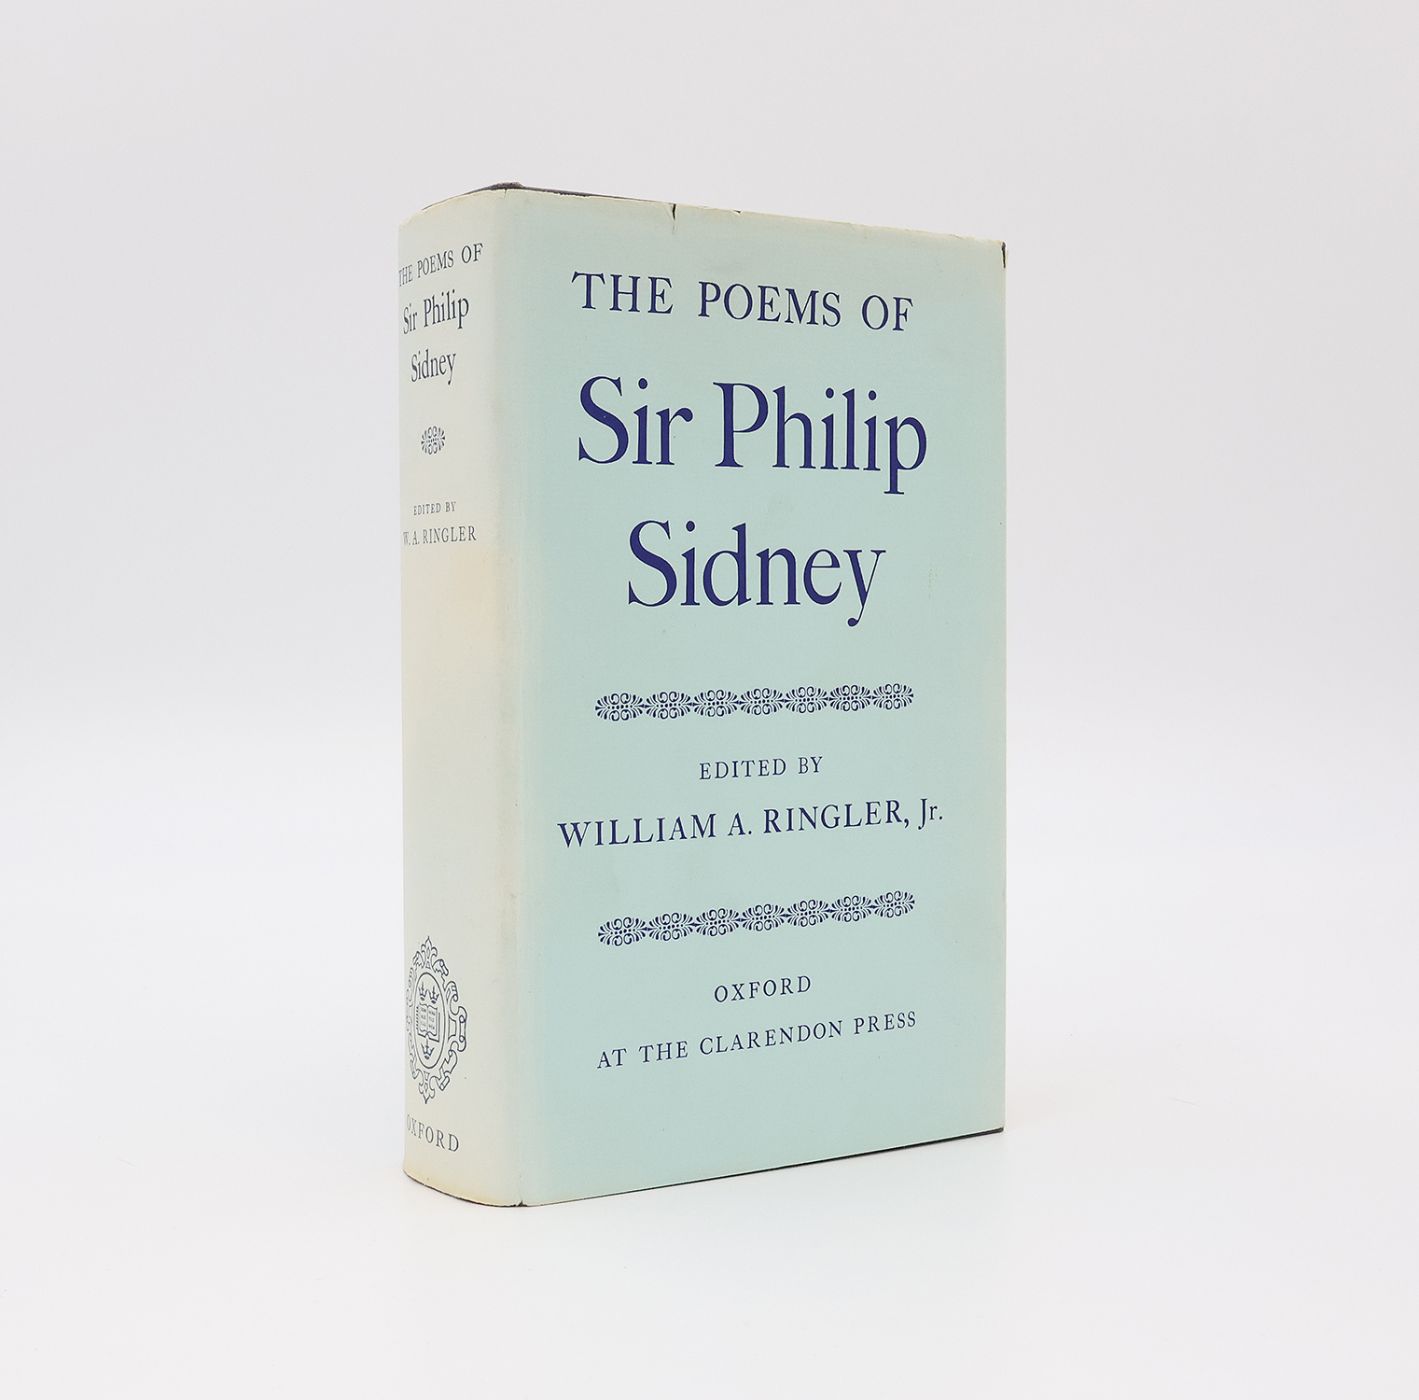 THE POEMS OF SIR PHILIP SIDNEY -  image 1